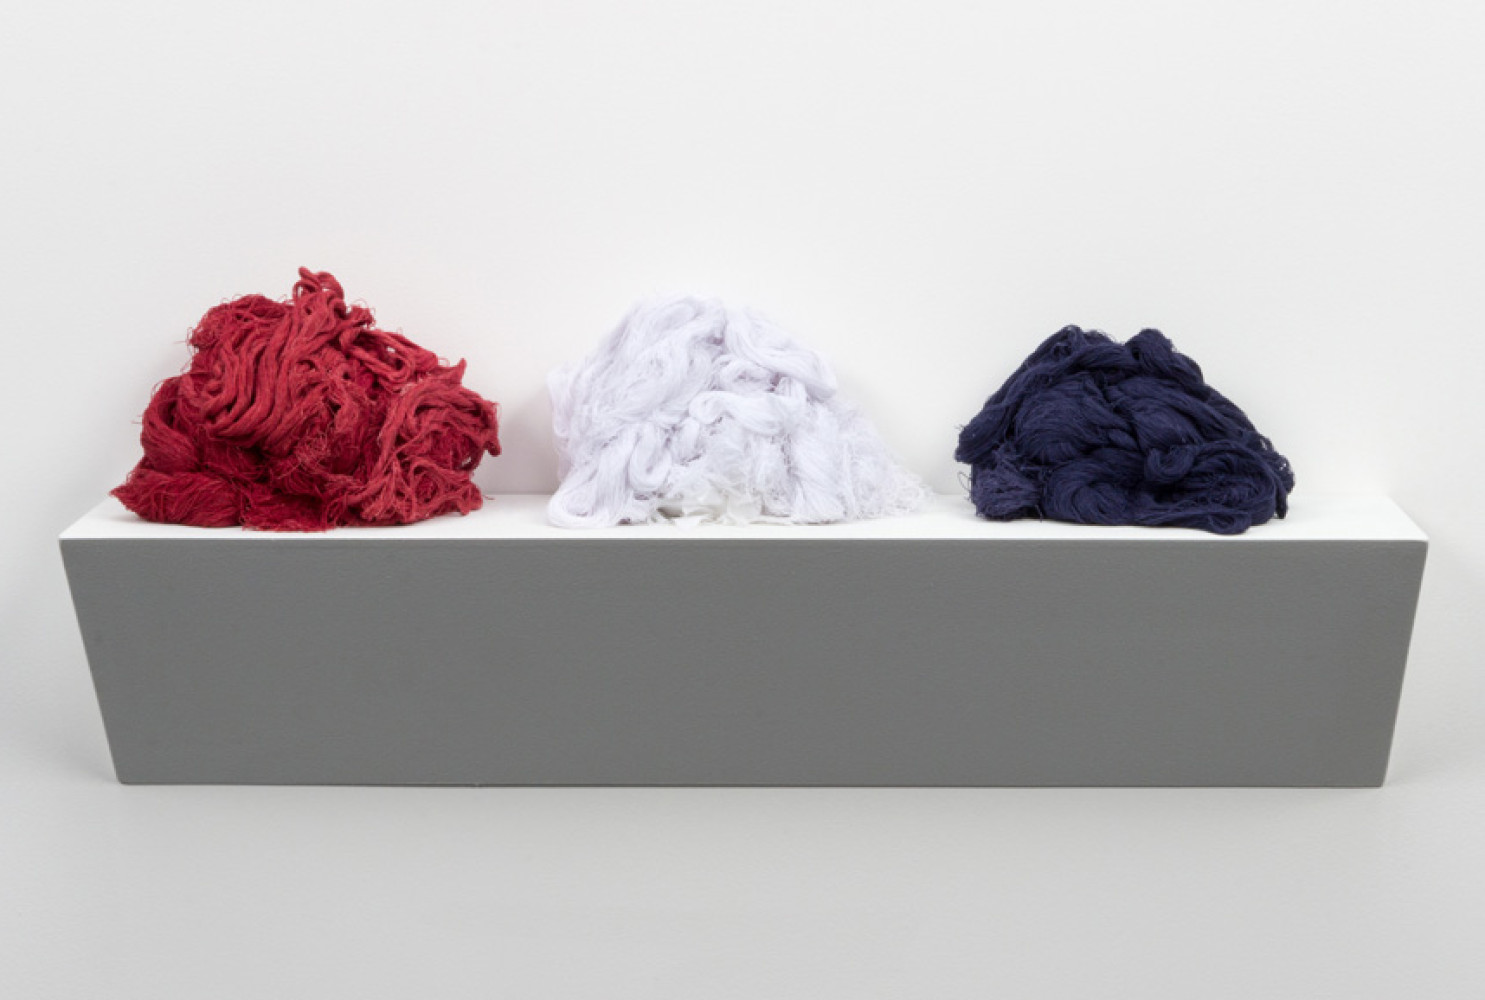 Unraveled, 2015, by Sonya Clark (American, b. 1967); unraveled cotton Confederate battle flag; 11 x 36 x 7 inches; Courtesy of the artist